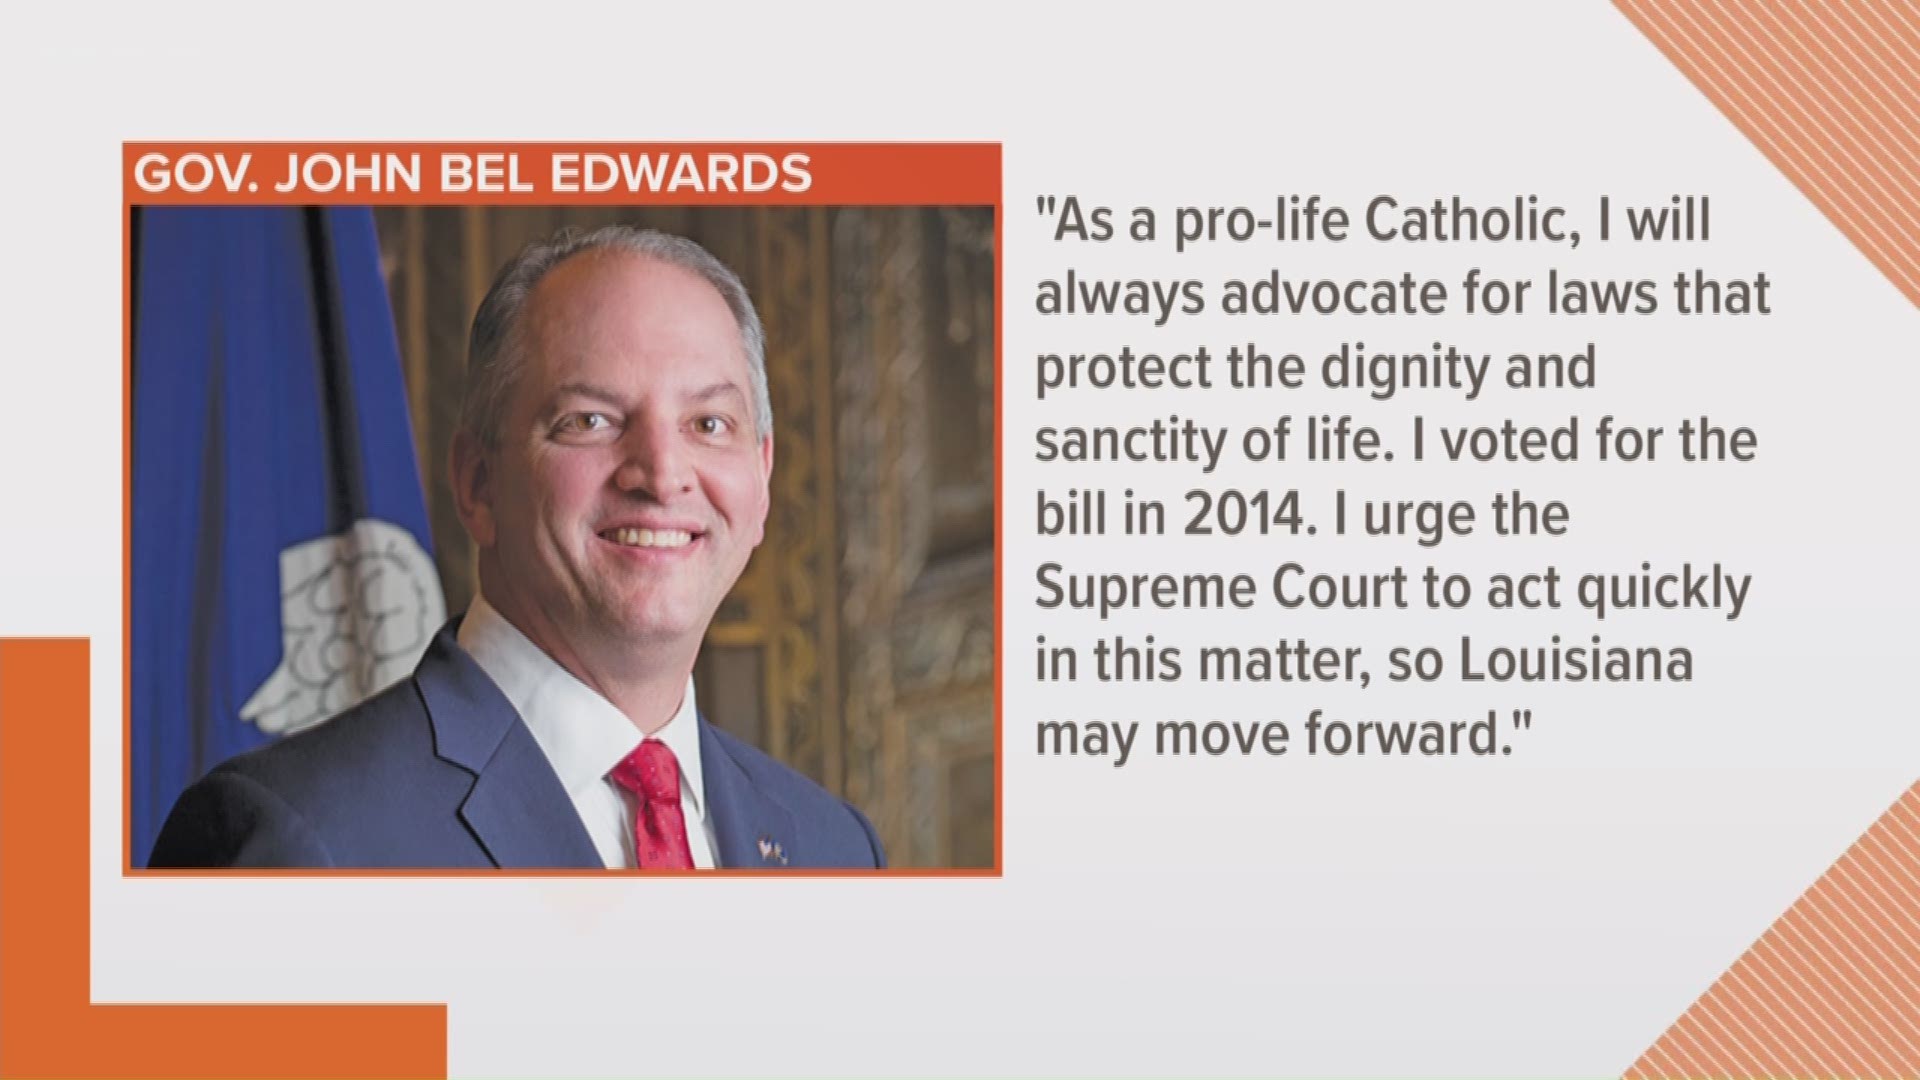 "As a pro-life Catholic...," the Governor's statement starts.